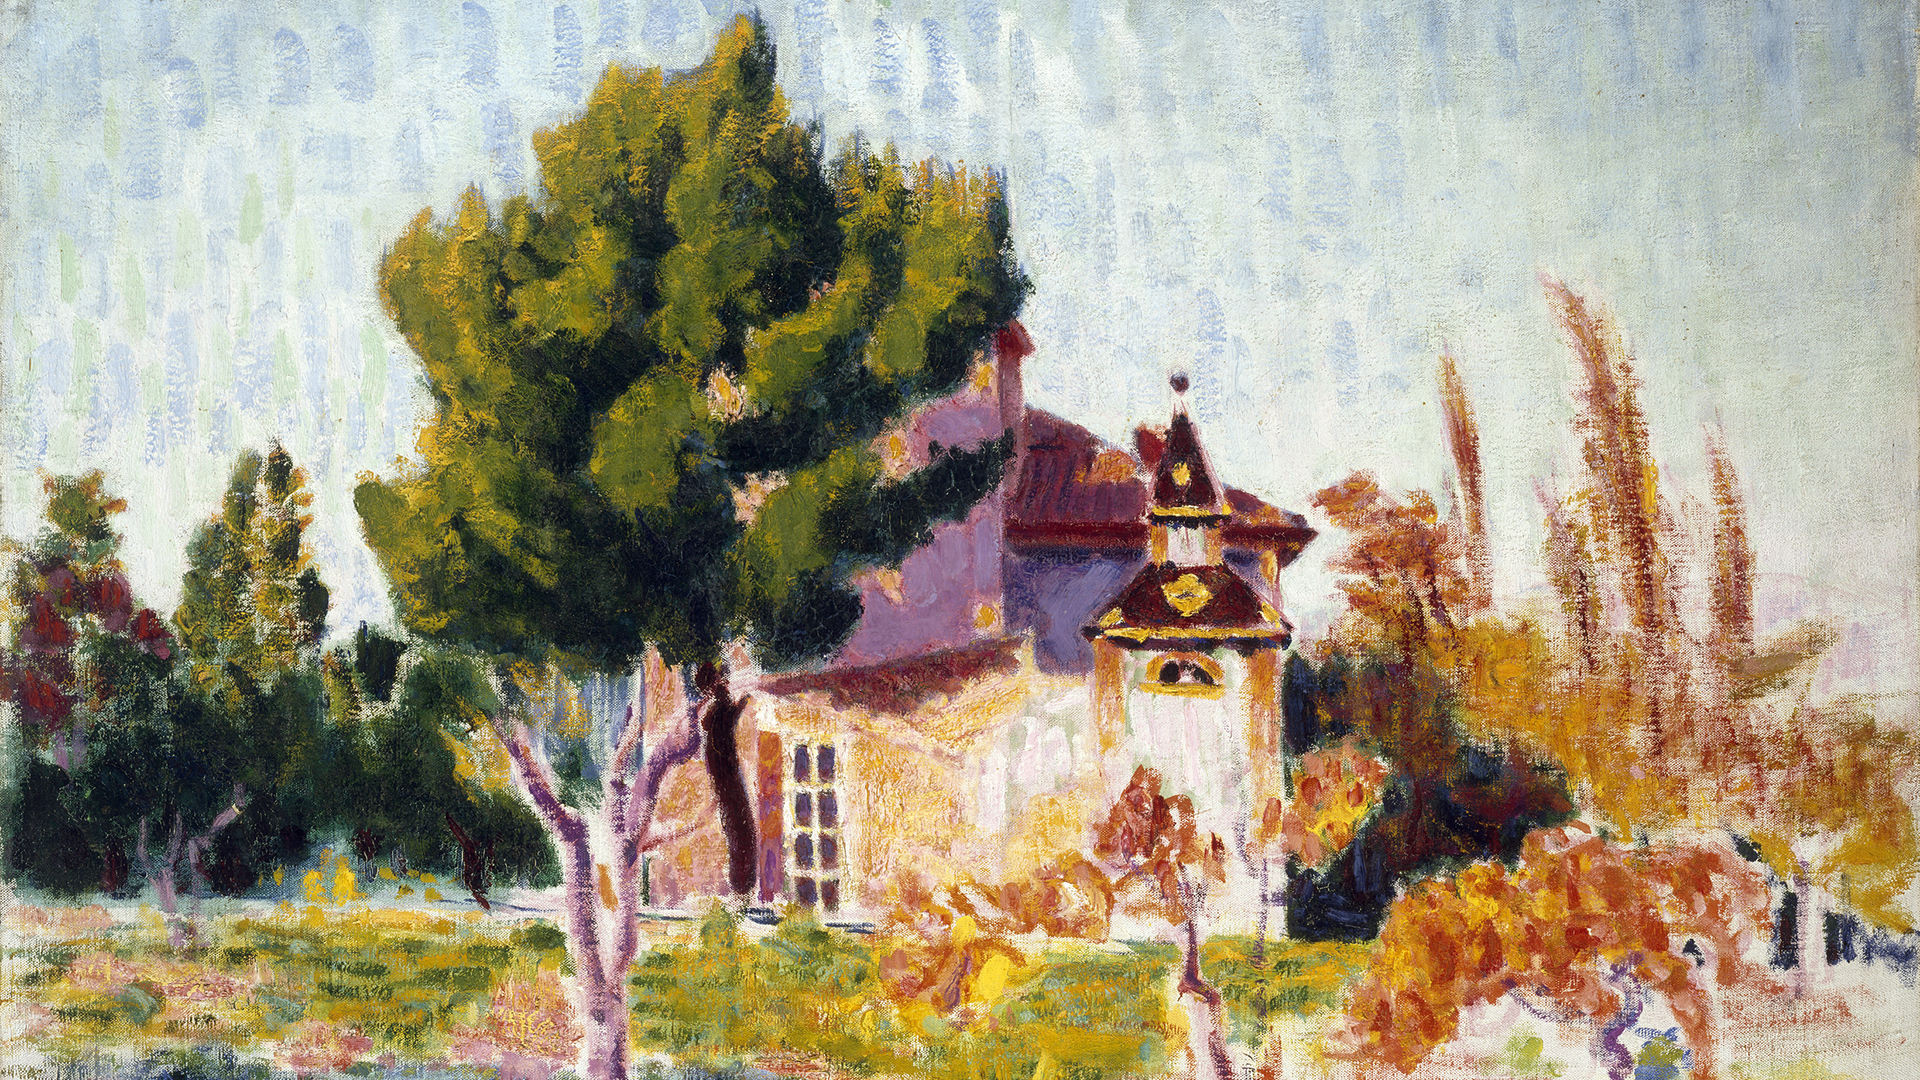 Expressionistic colourful painting of a building in the countryside